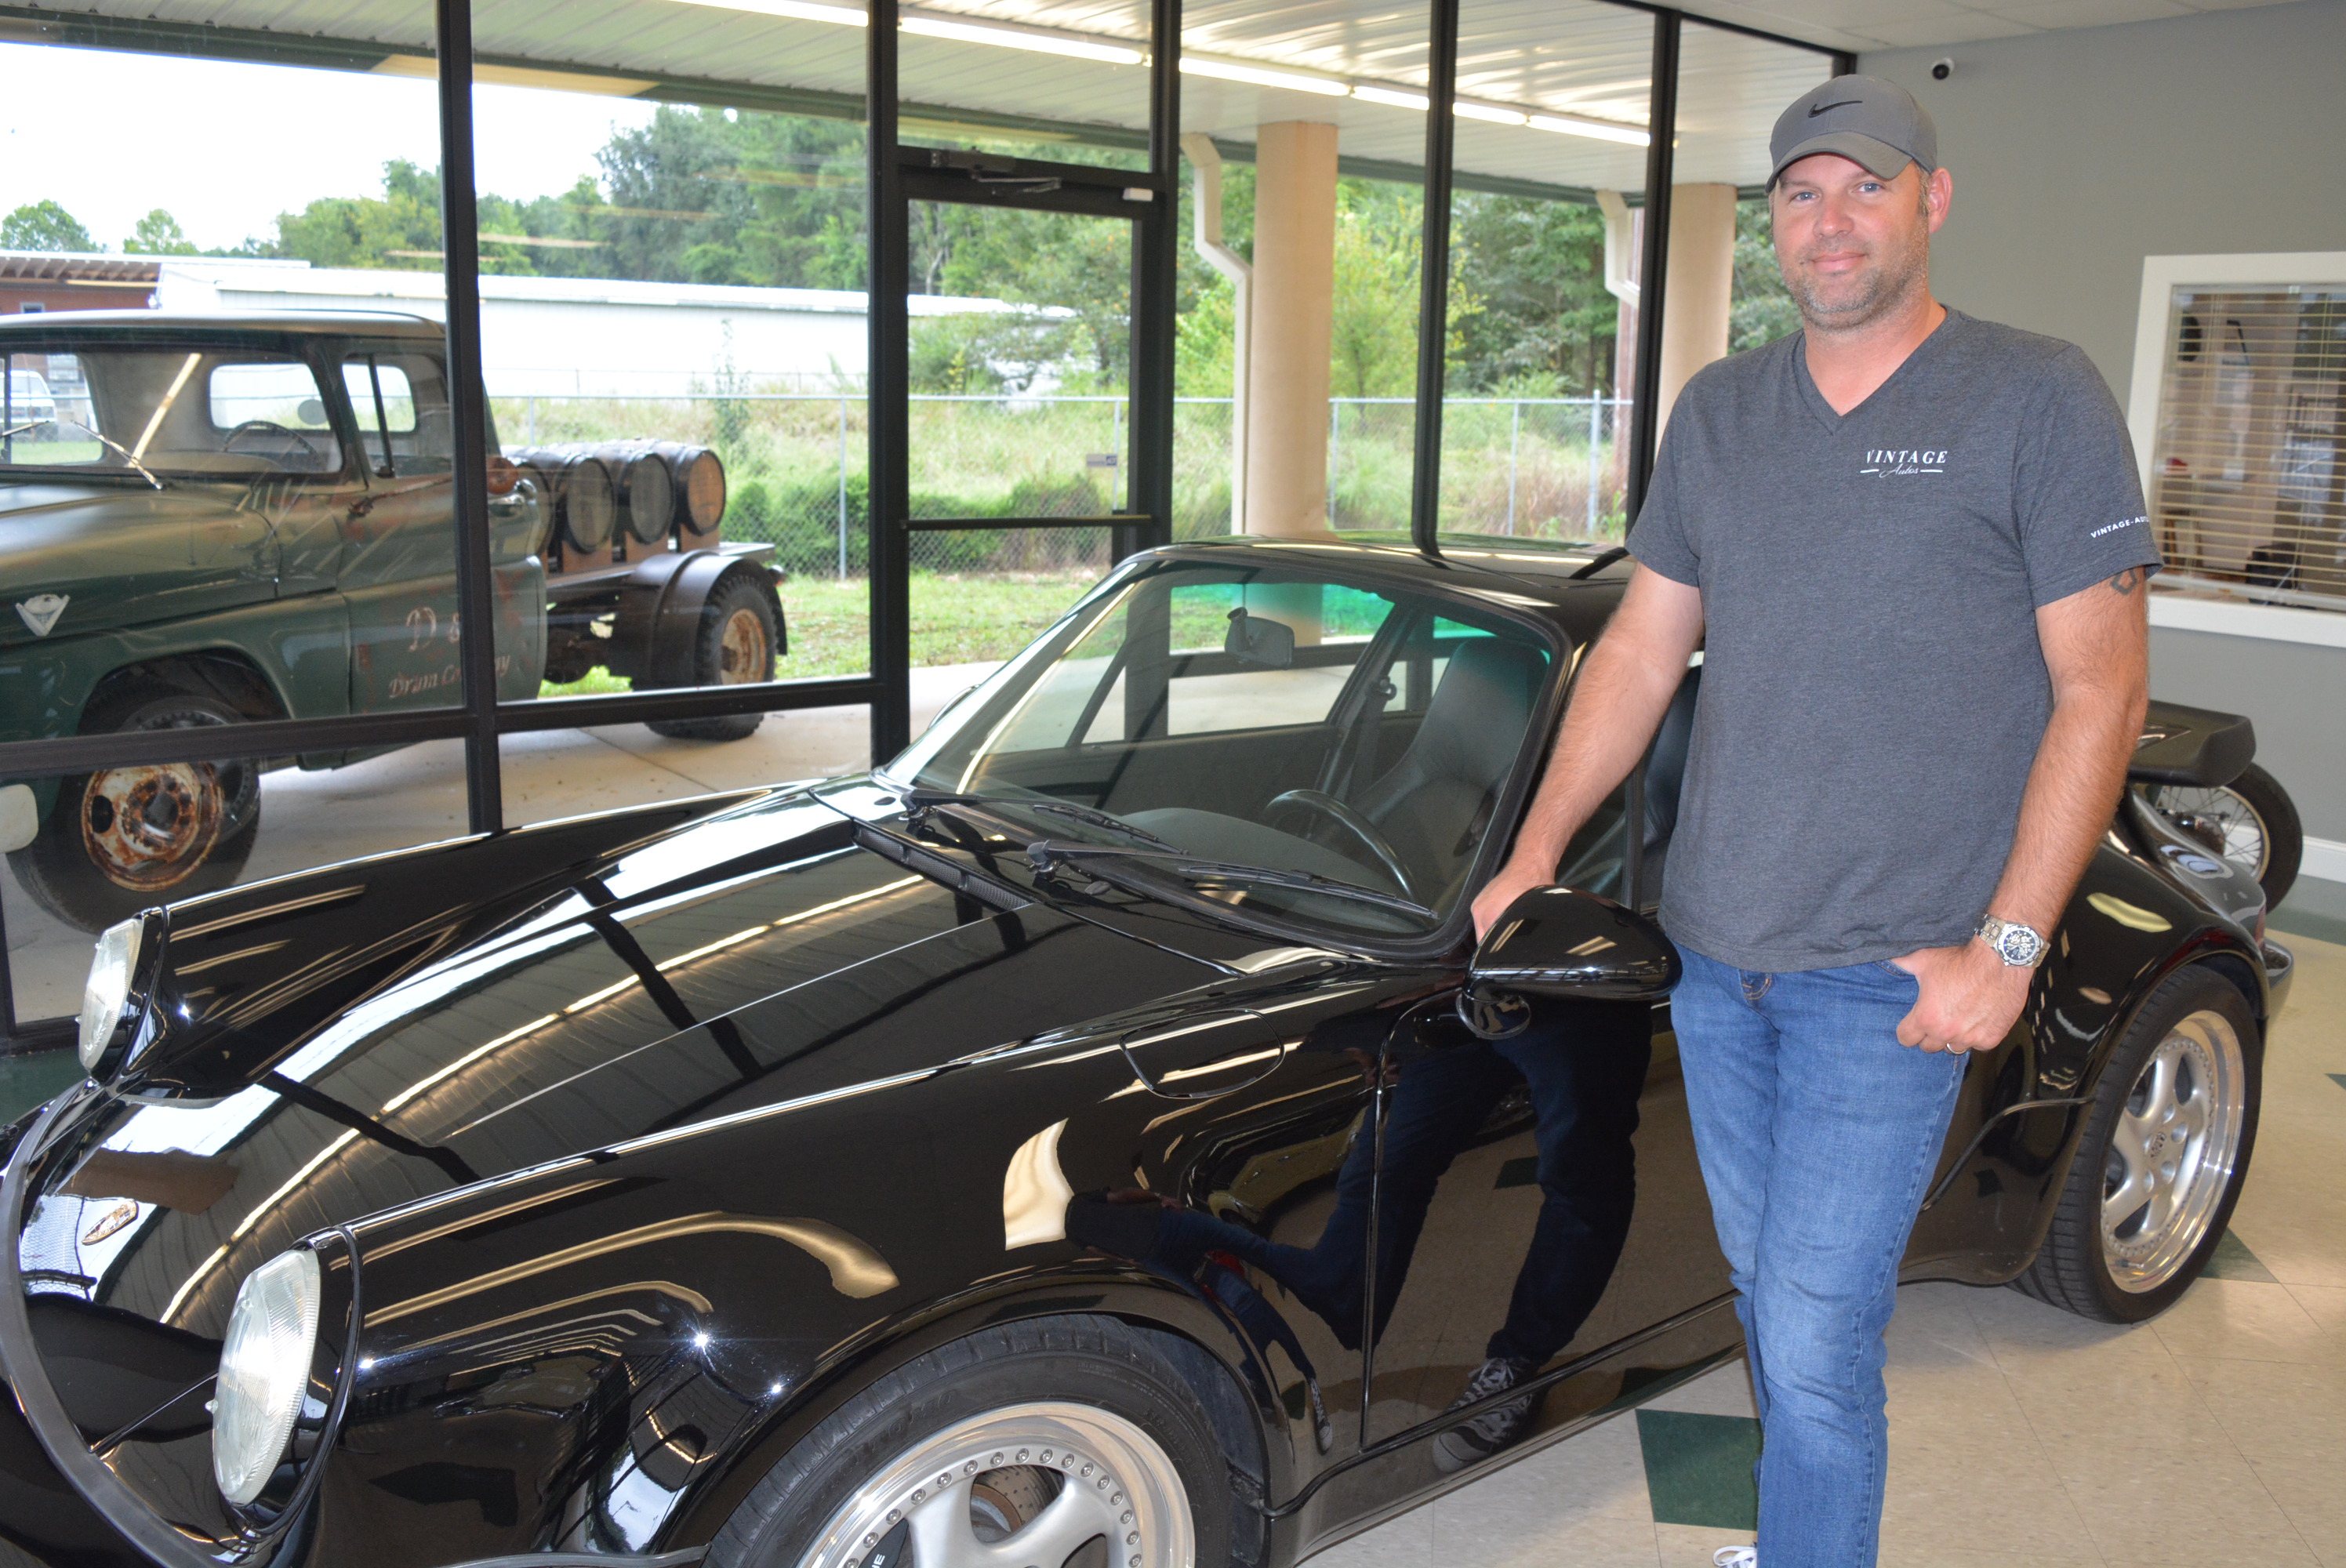 Vintage Autos brings Classic Wheels to the Shoals